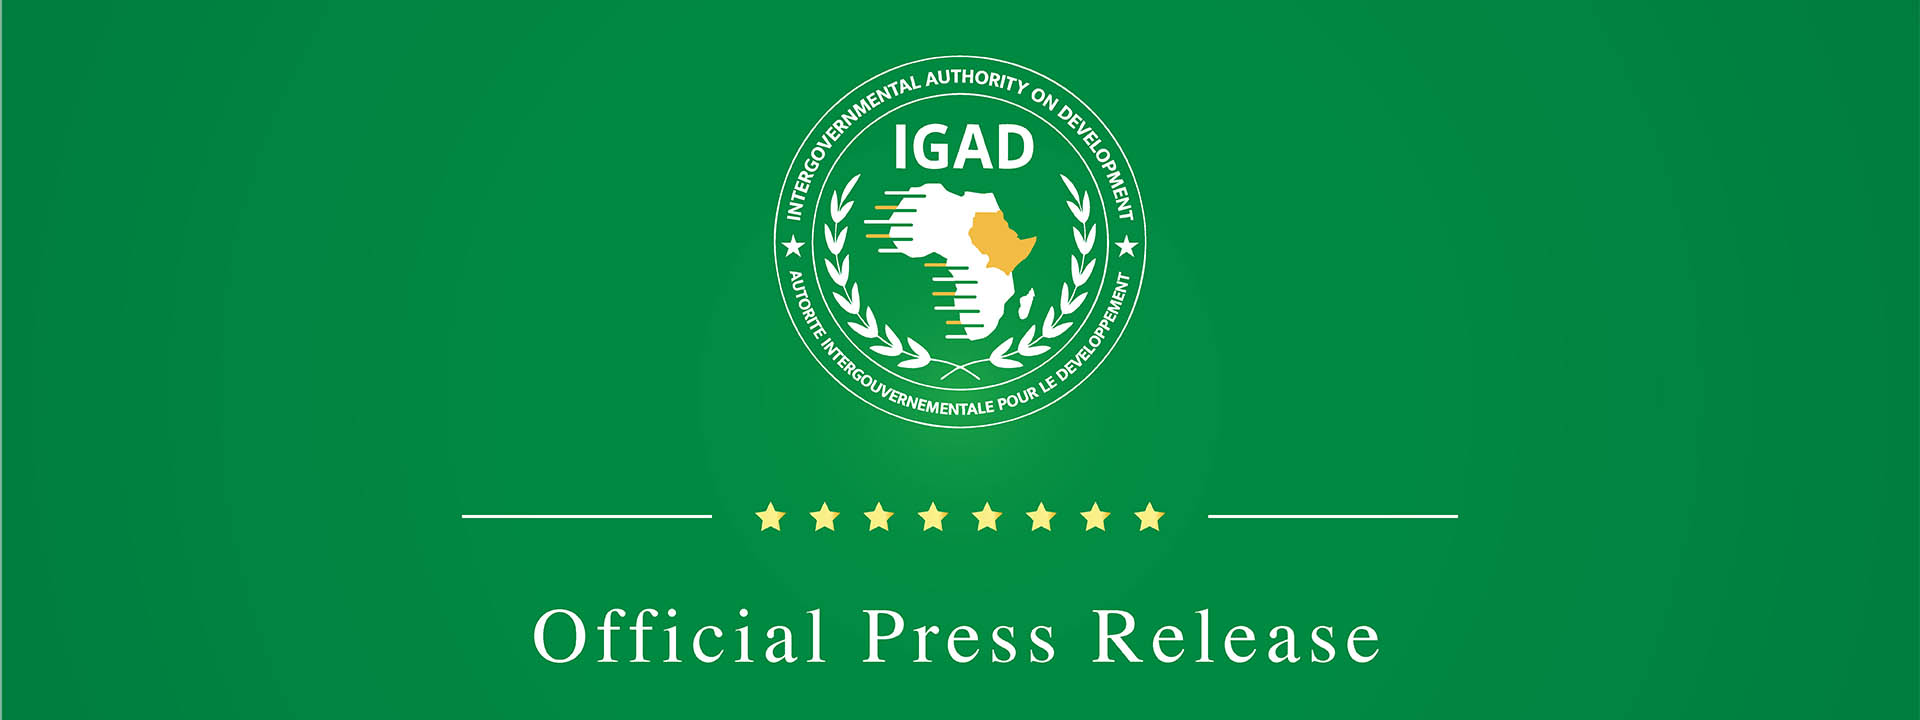 IGAD Executive Secretary Condemns Terrorist Attack on African Union Peacekeepers in Somalia